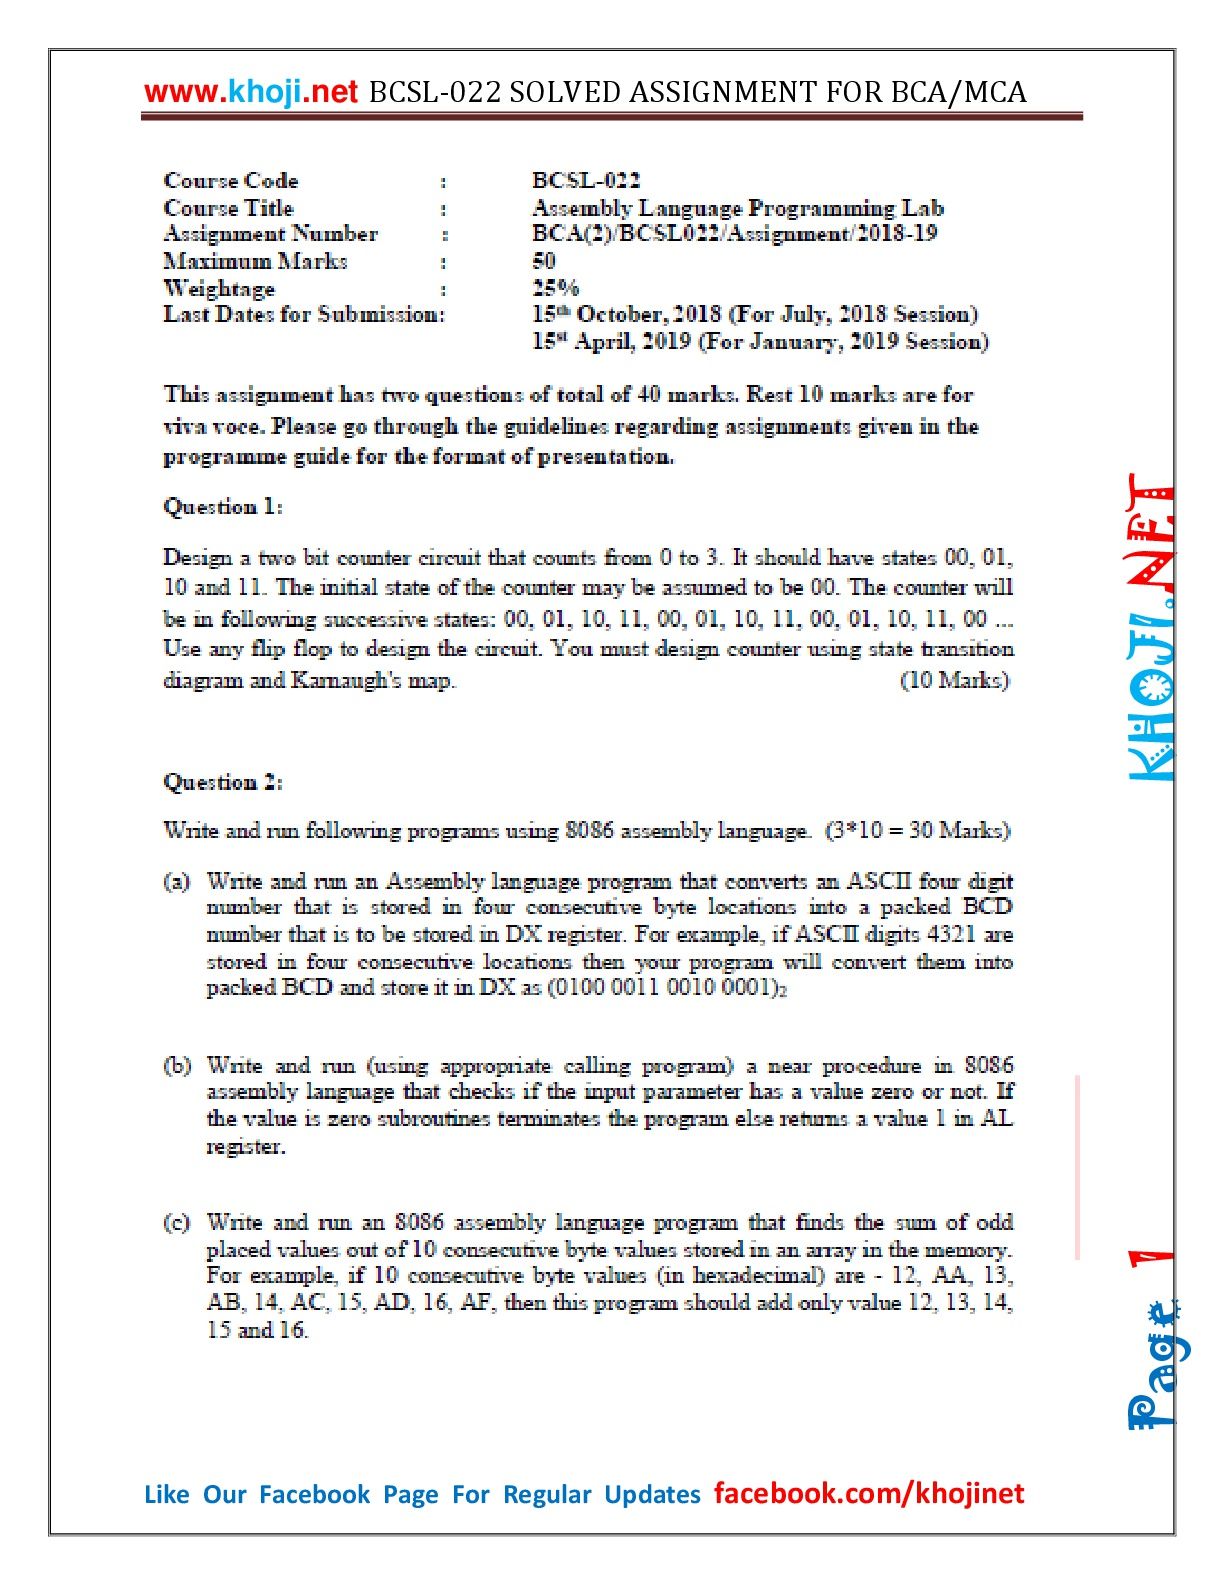 BCSL-022 Solved Assignment For IGNOU BCA 2nd Semester 2018-2019 in PDF Format